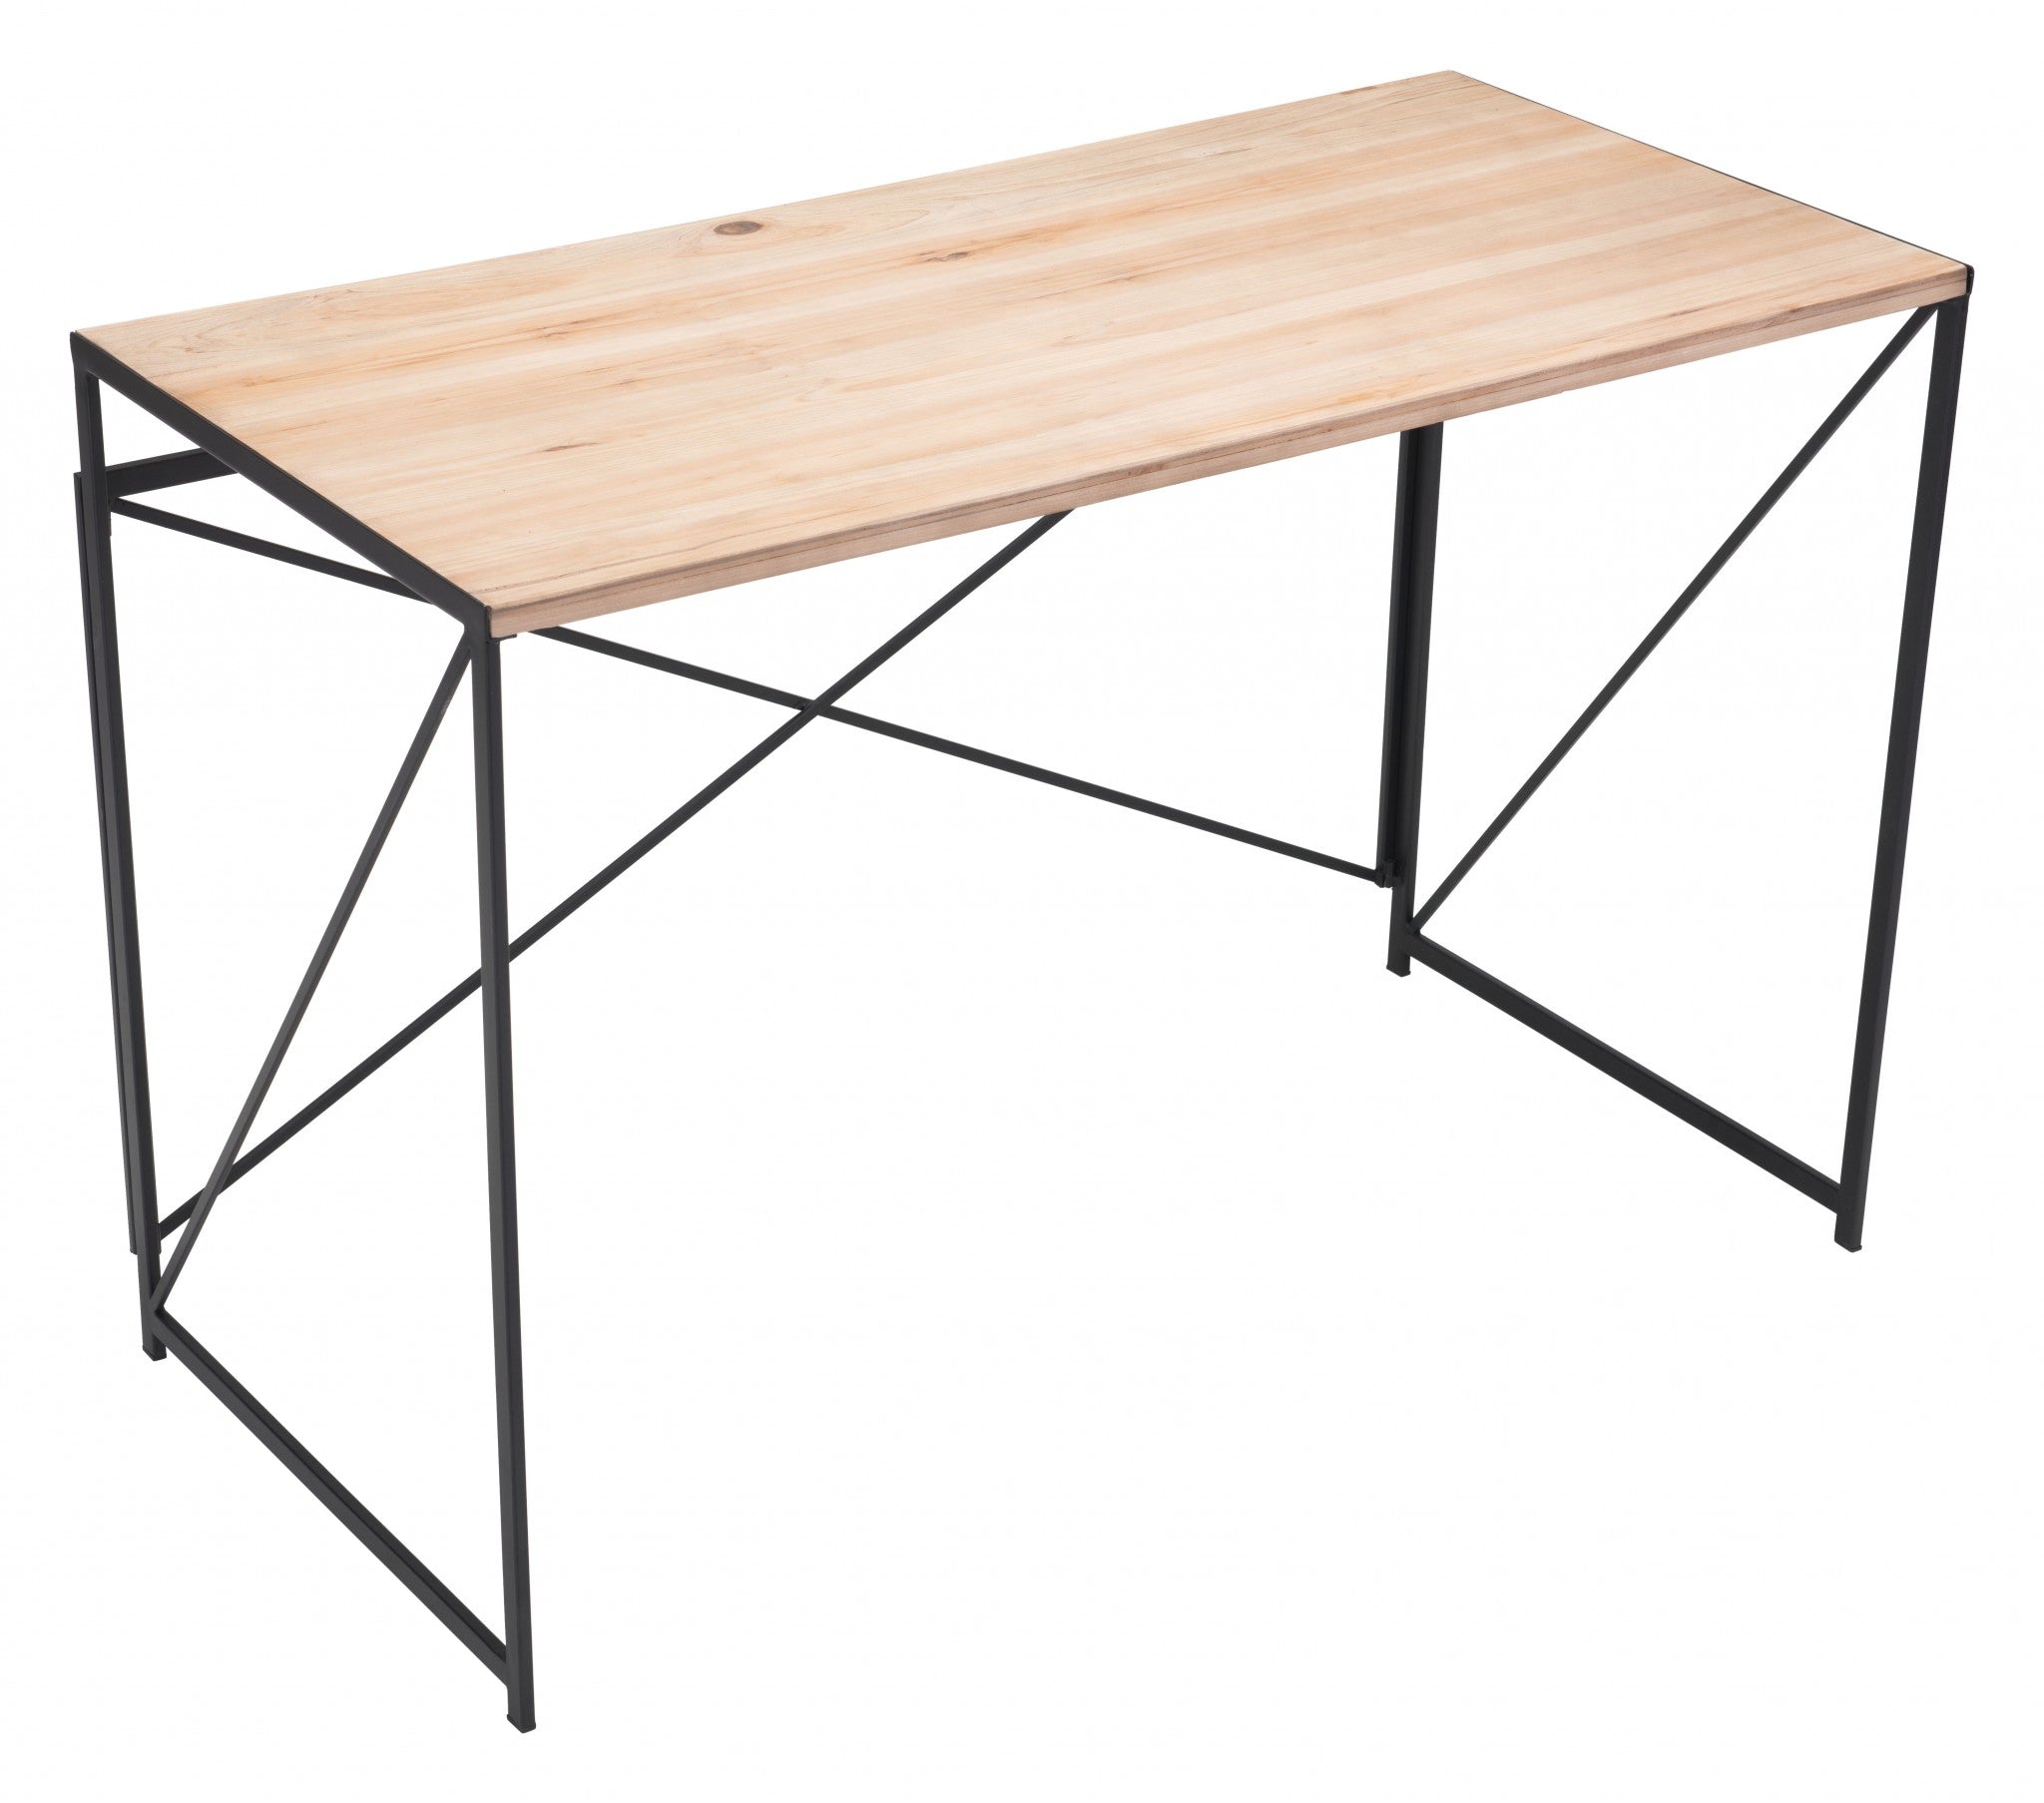 45" Natural and Black Solid Wood Writing Desk